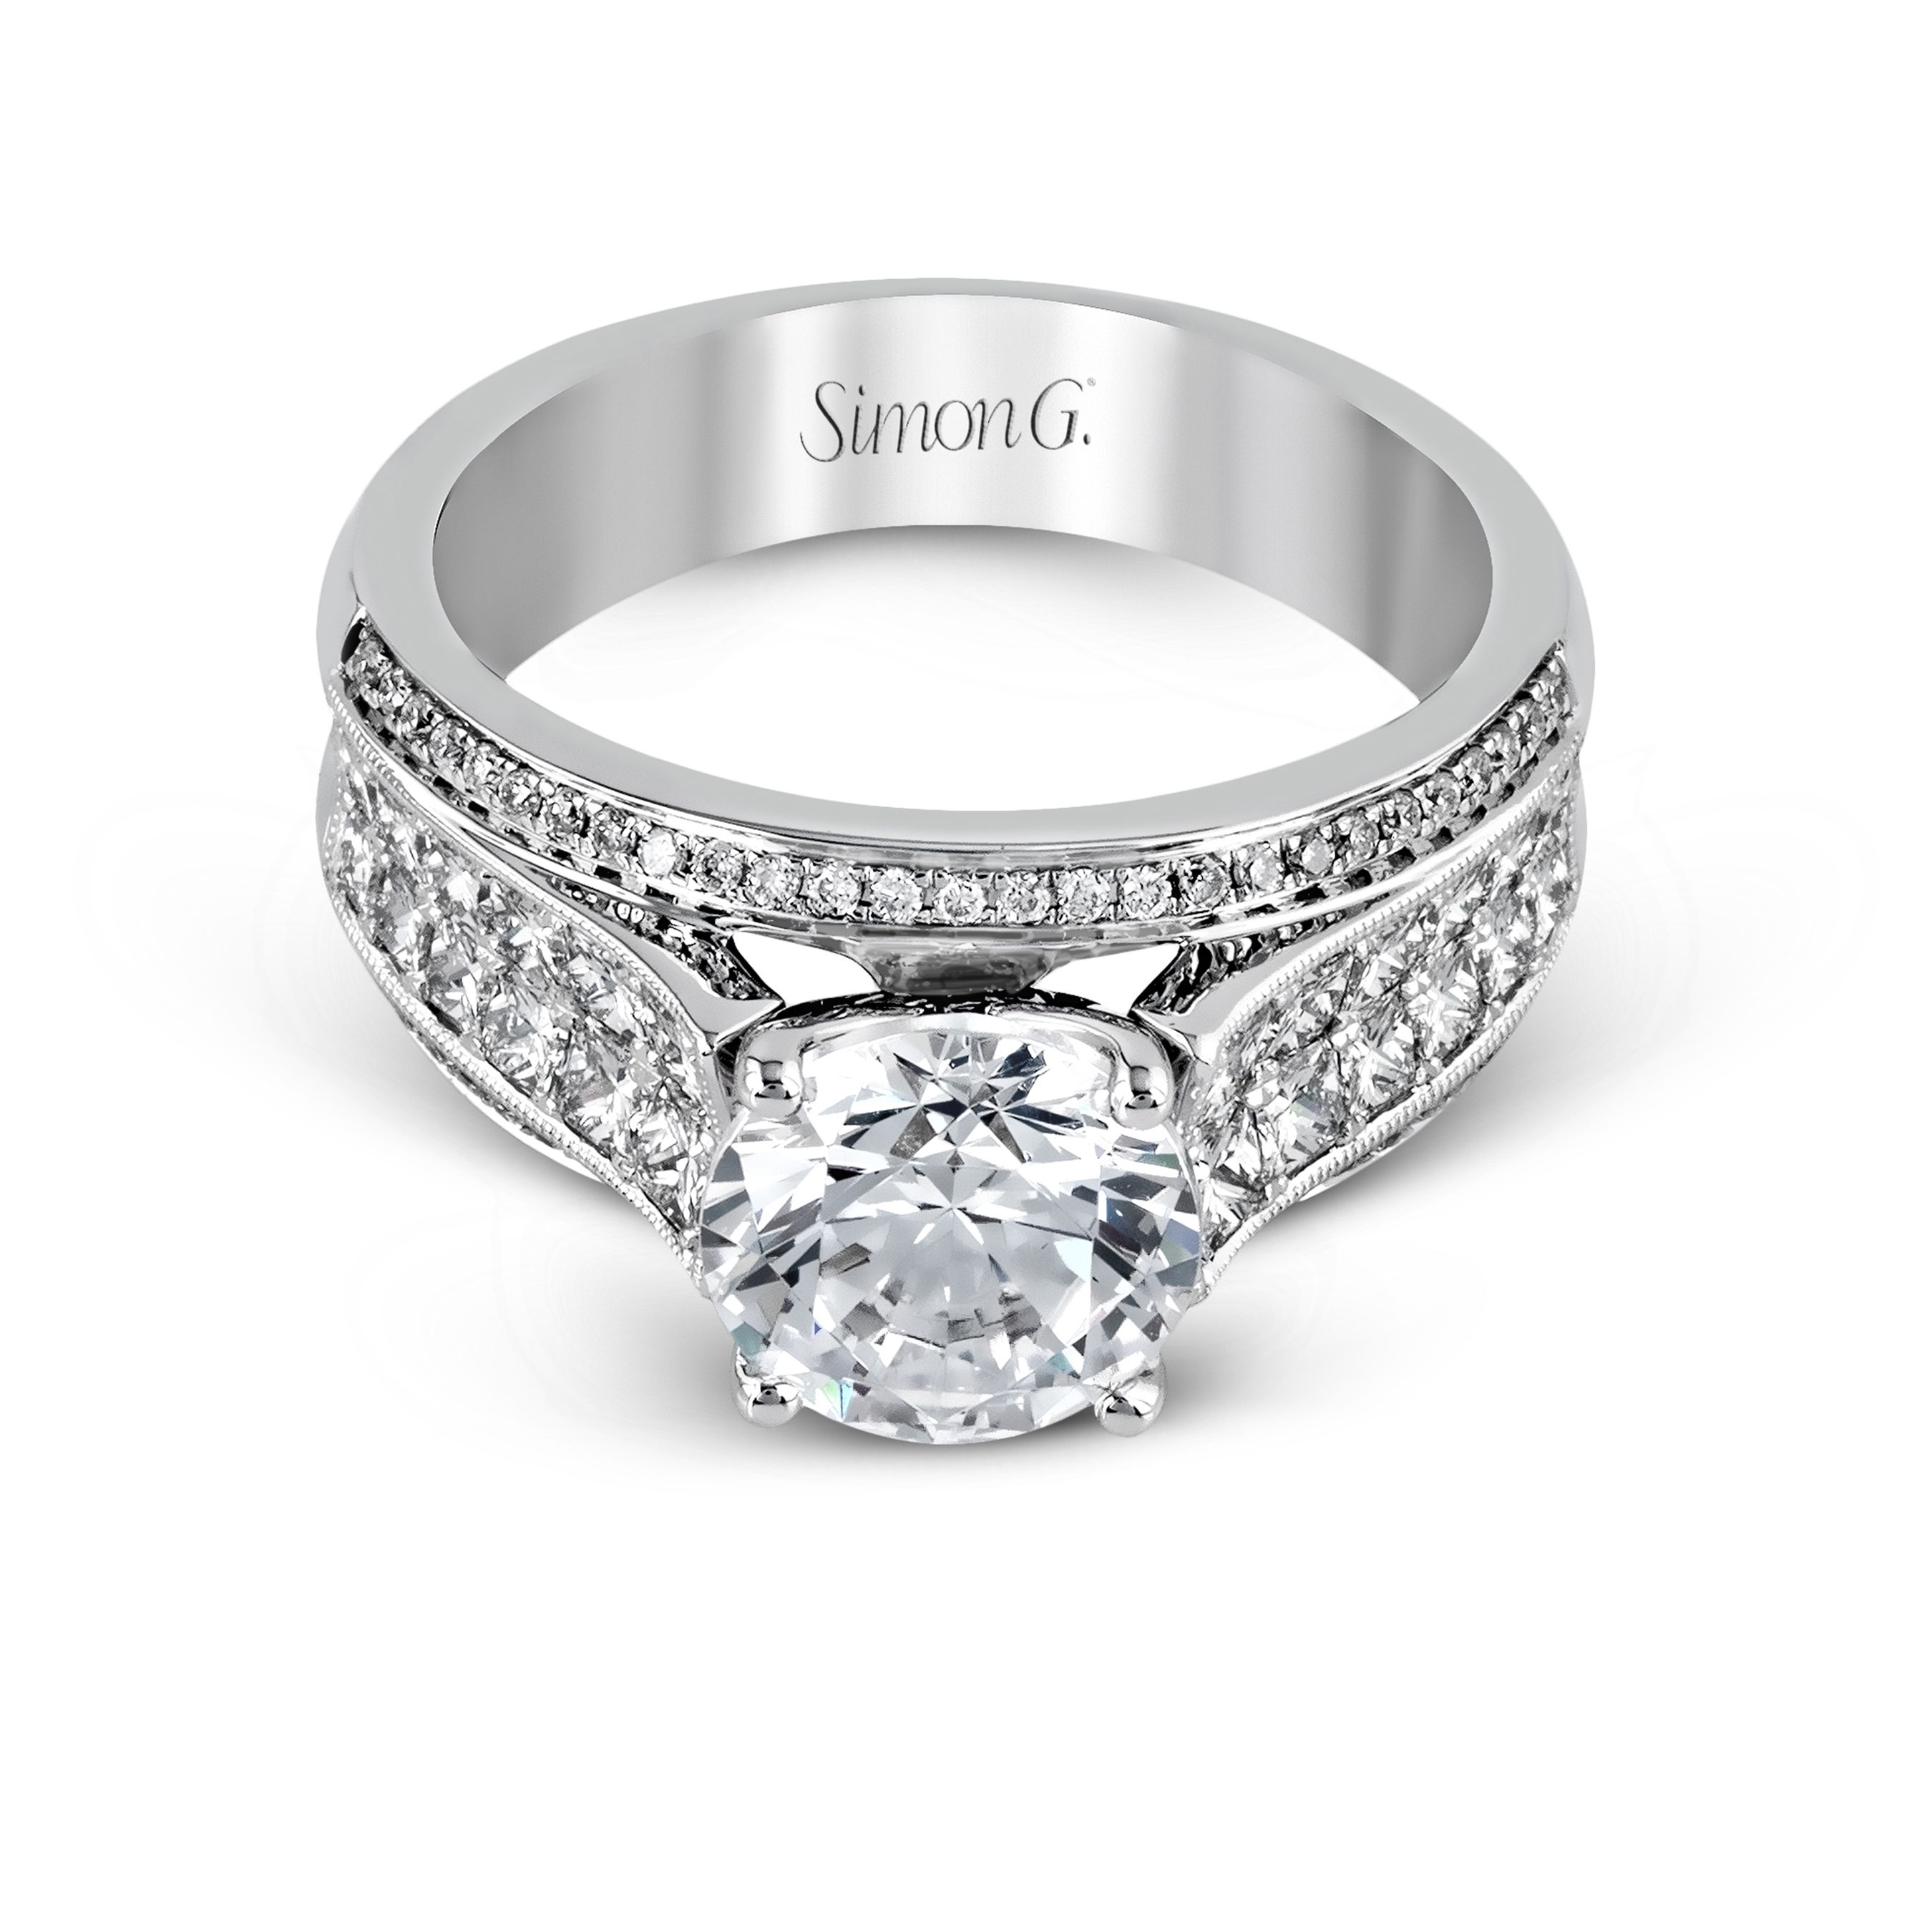 MR2425 Nocturnal Sophistication Collection White Gold Round Cut Engagement Ring